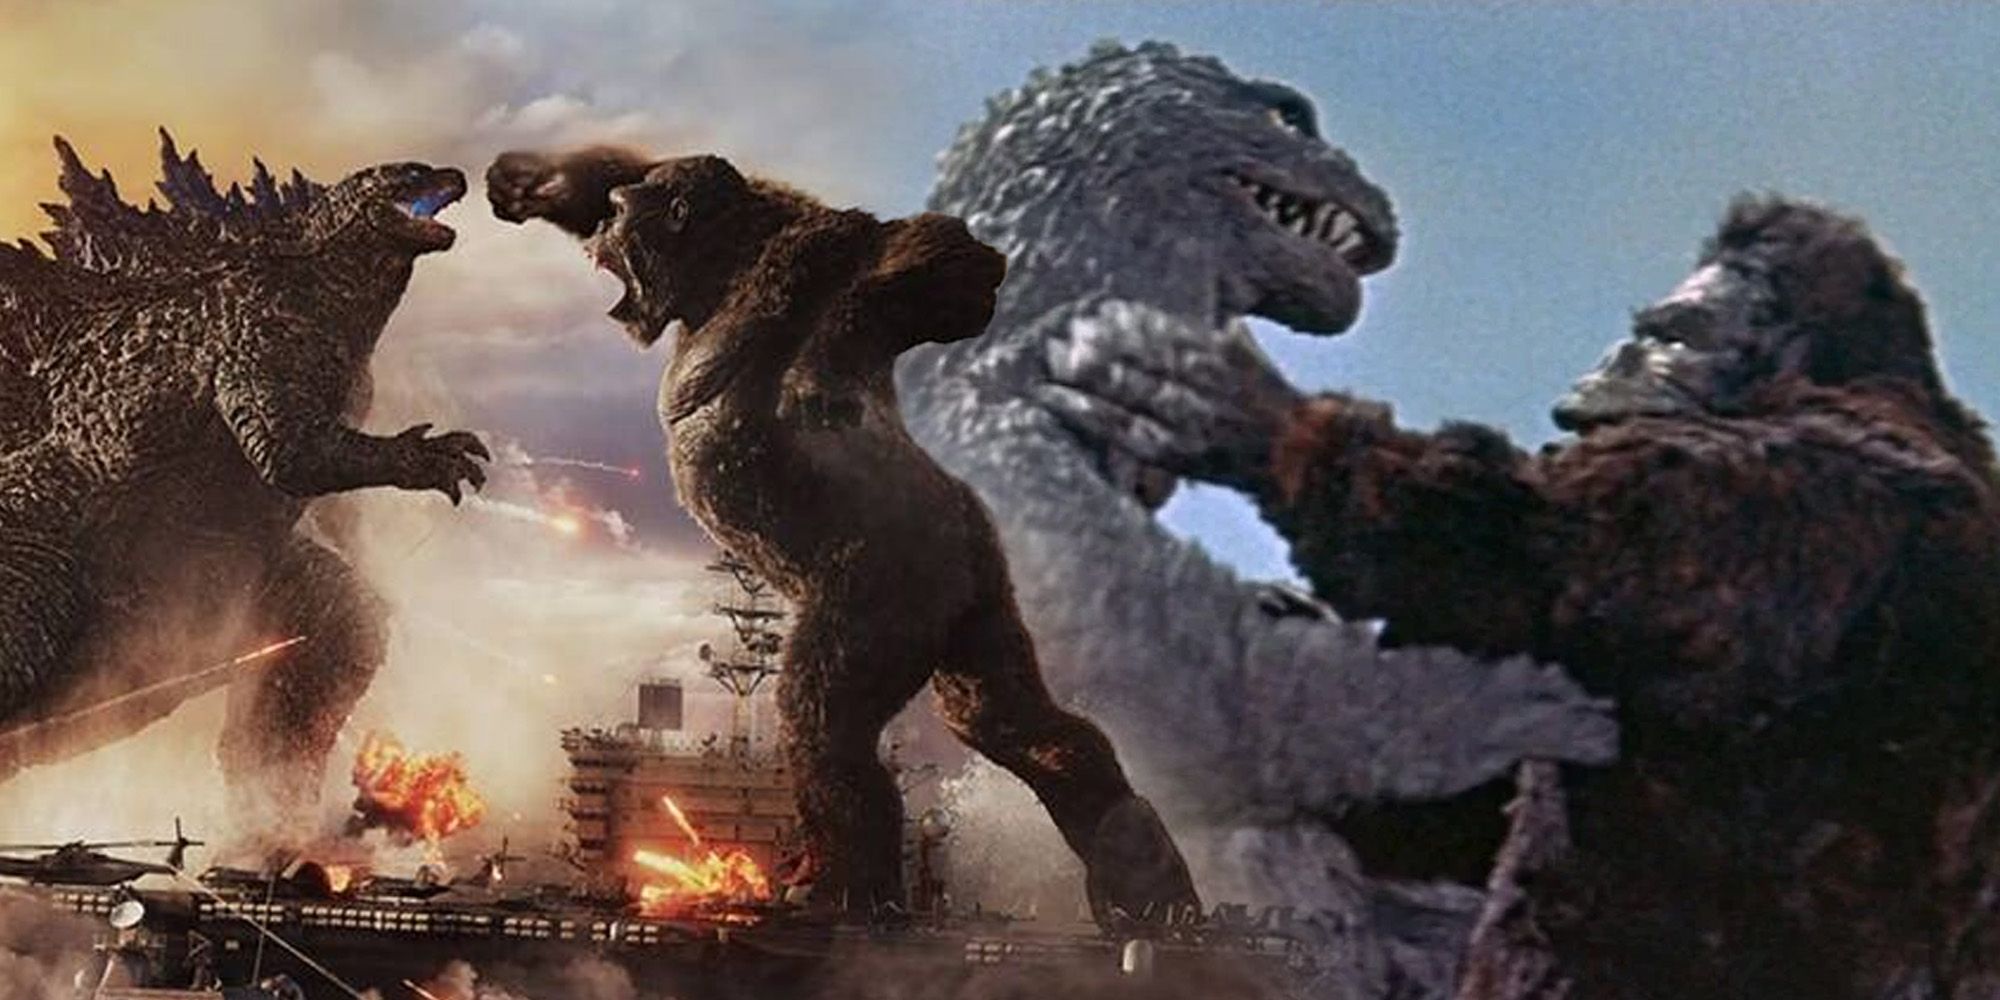 Why Godzilla & Kong's Fight Will Be Nothing Like The Original